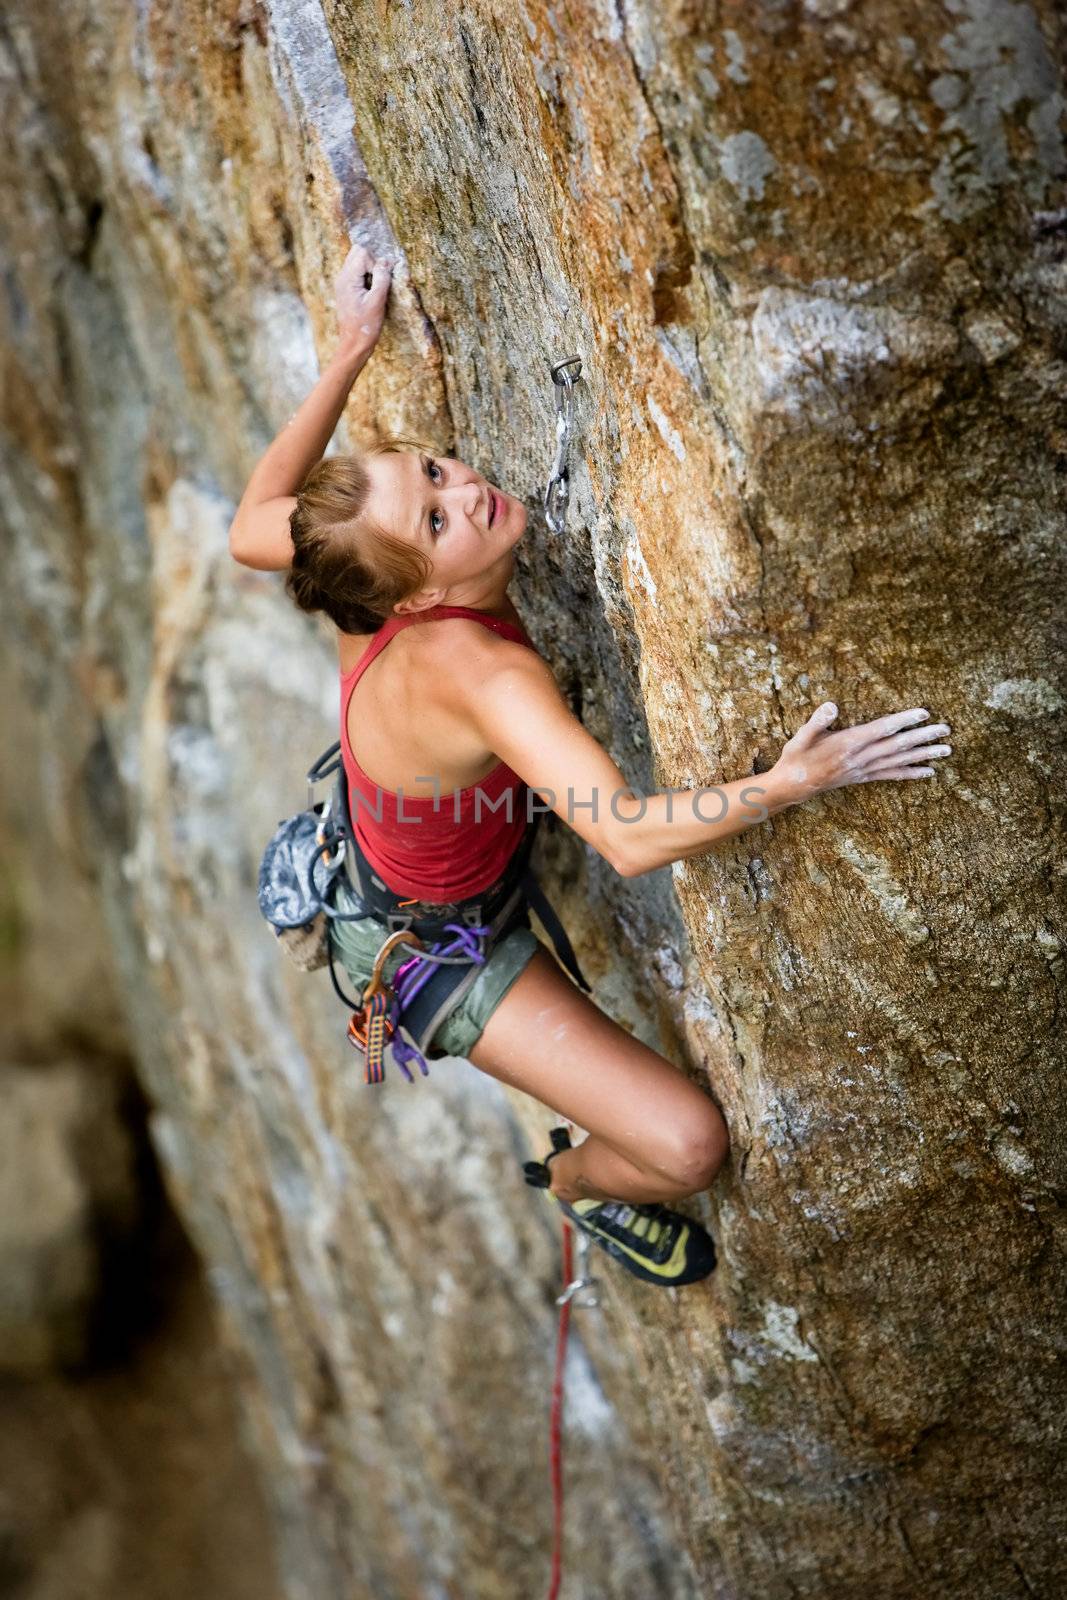 An eager female climber on a steep rock face looks for the next hold - viewed from above.  Shallow depth of field is used to isolated the climber.